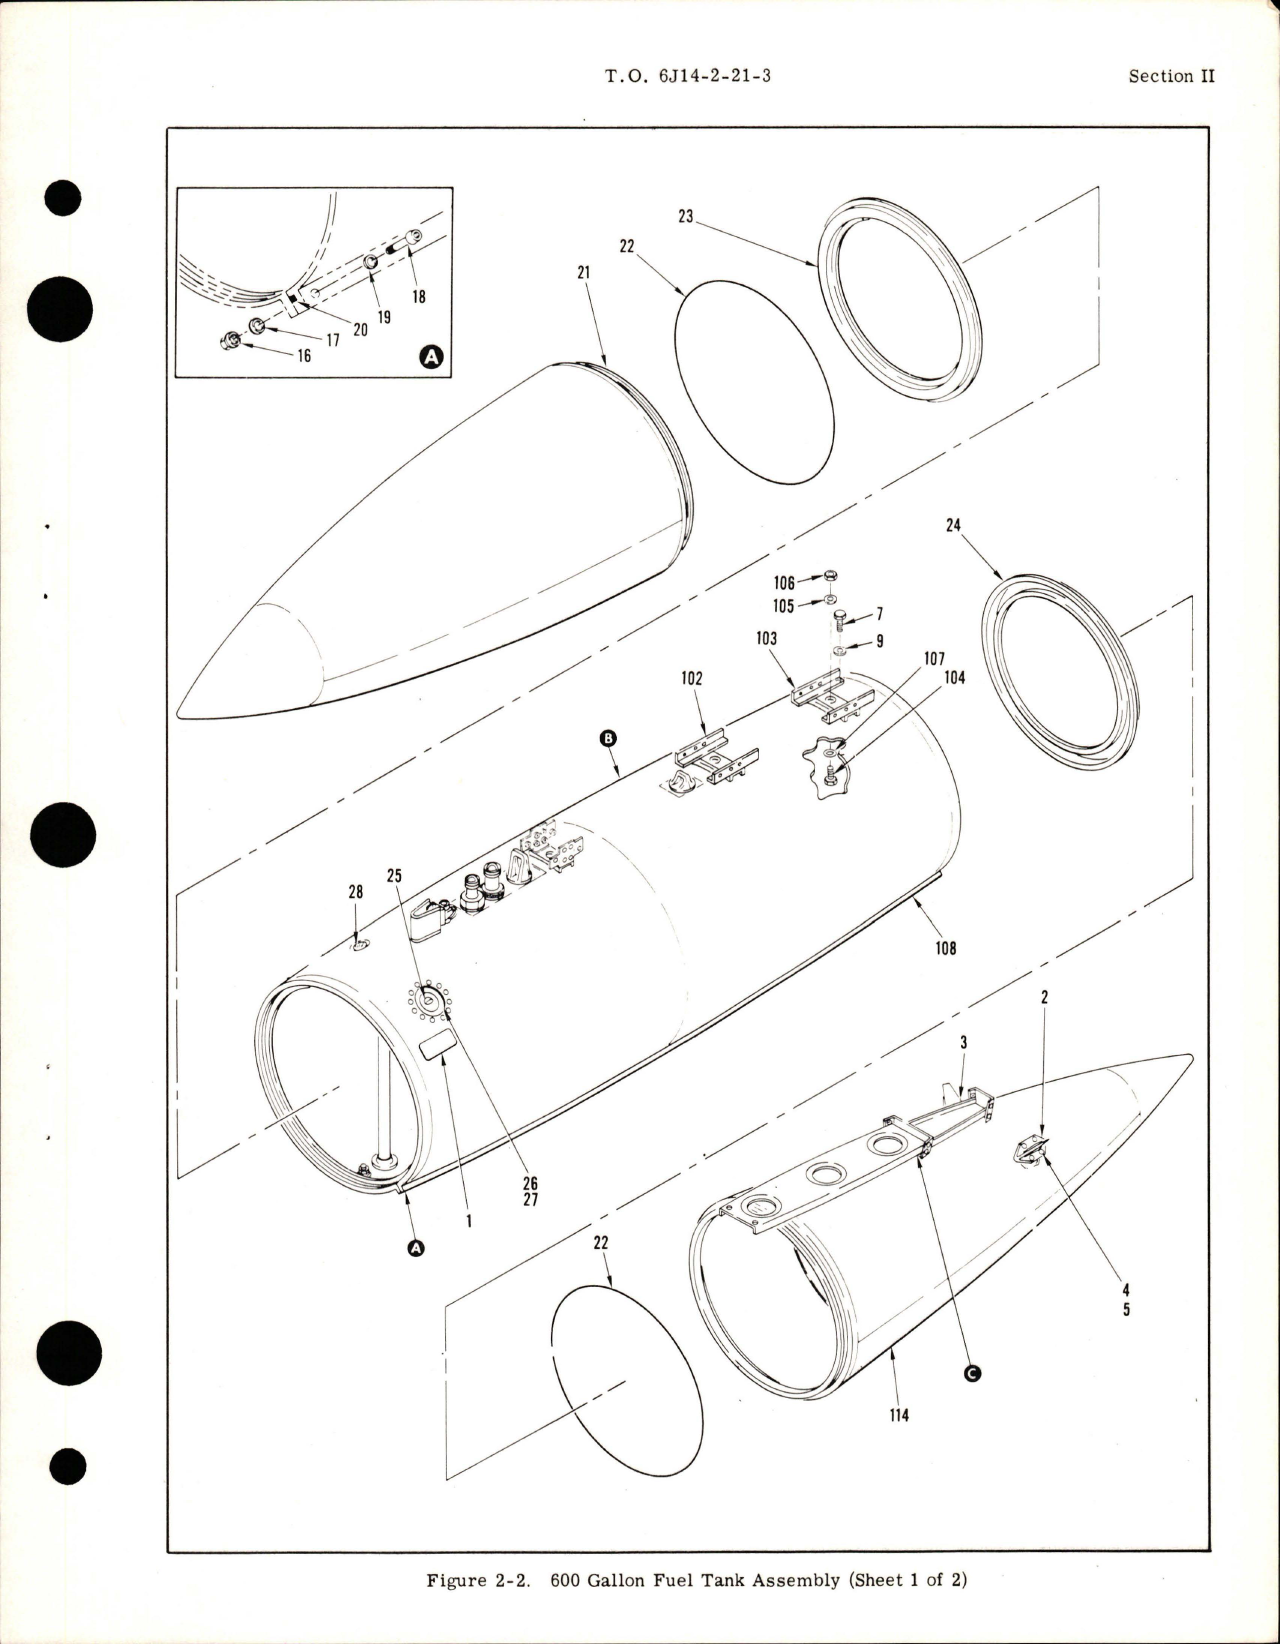 Sample page 7 from AirCorps Library document: Overhaul Instructions for 600 Gallon Fuel Tanks - Parts 501800 and 501800-501